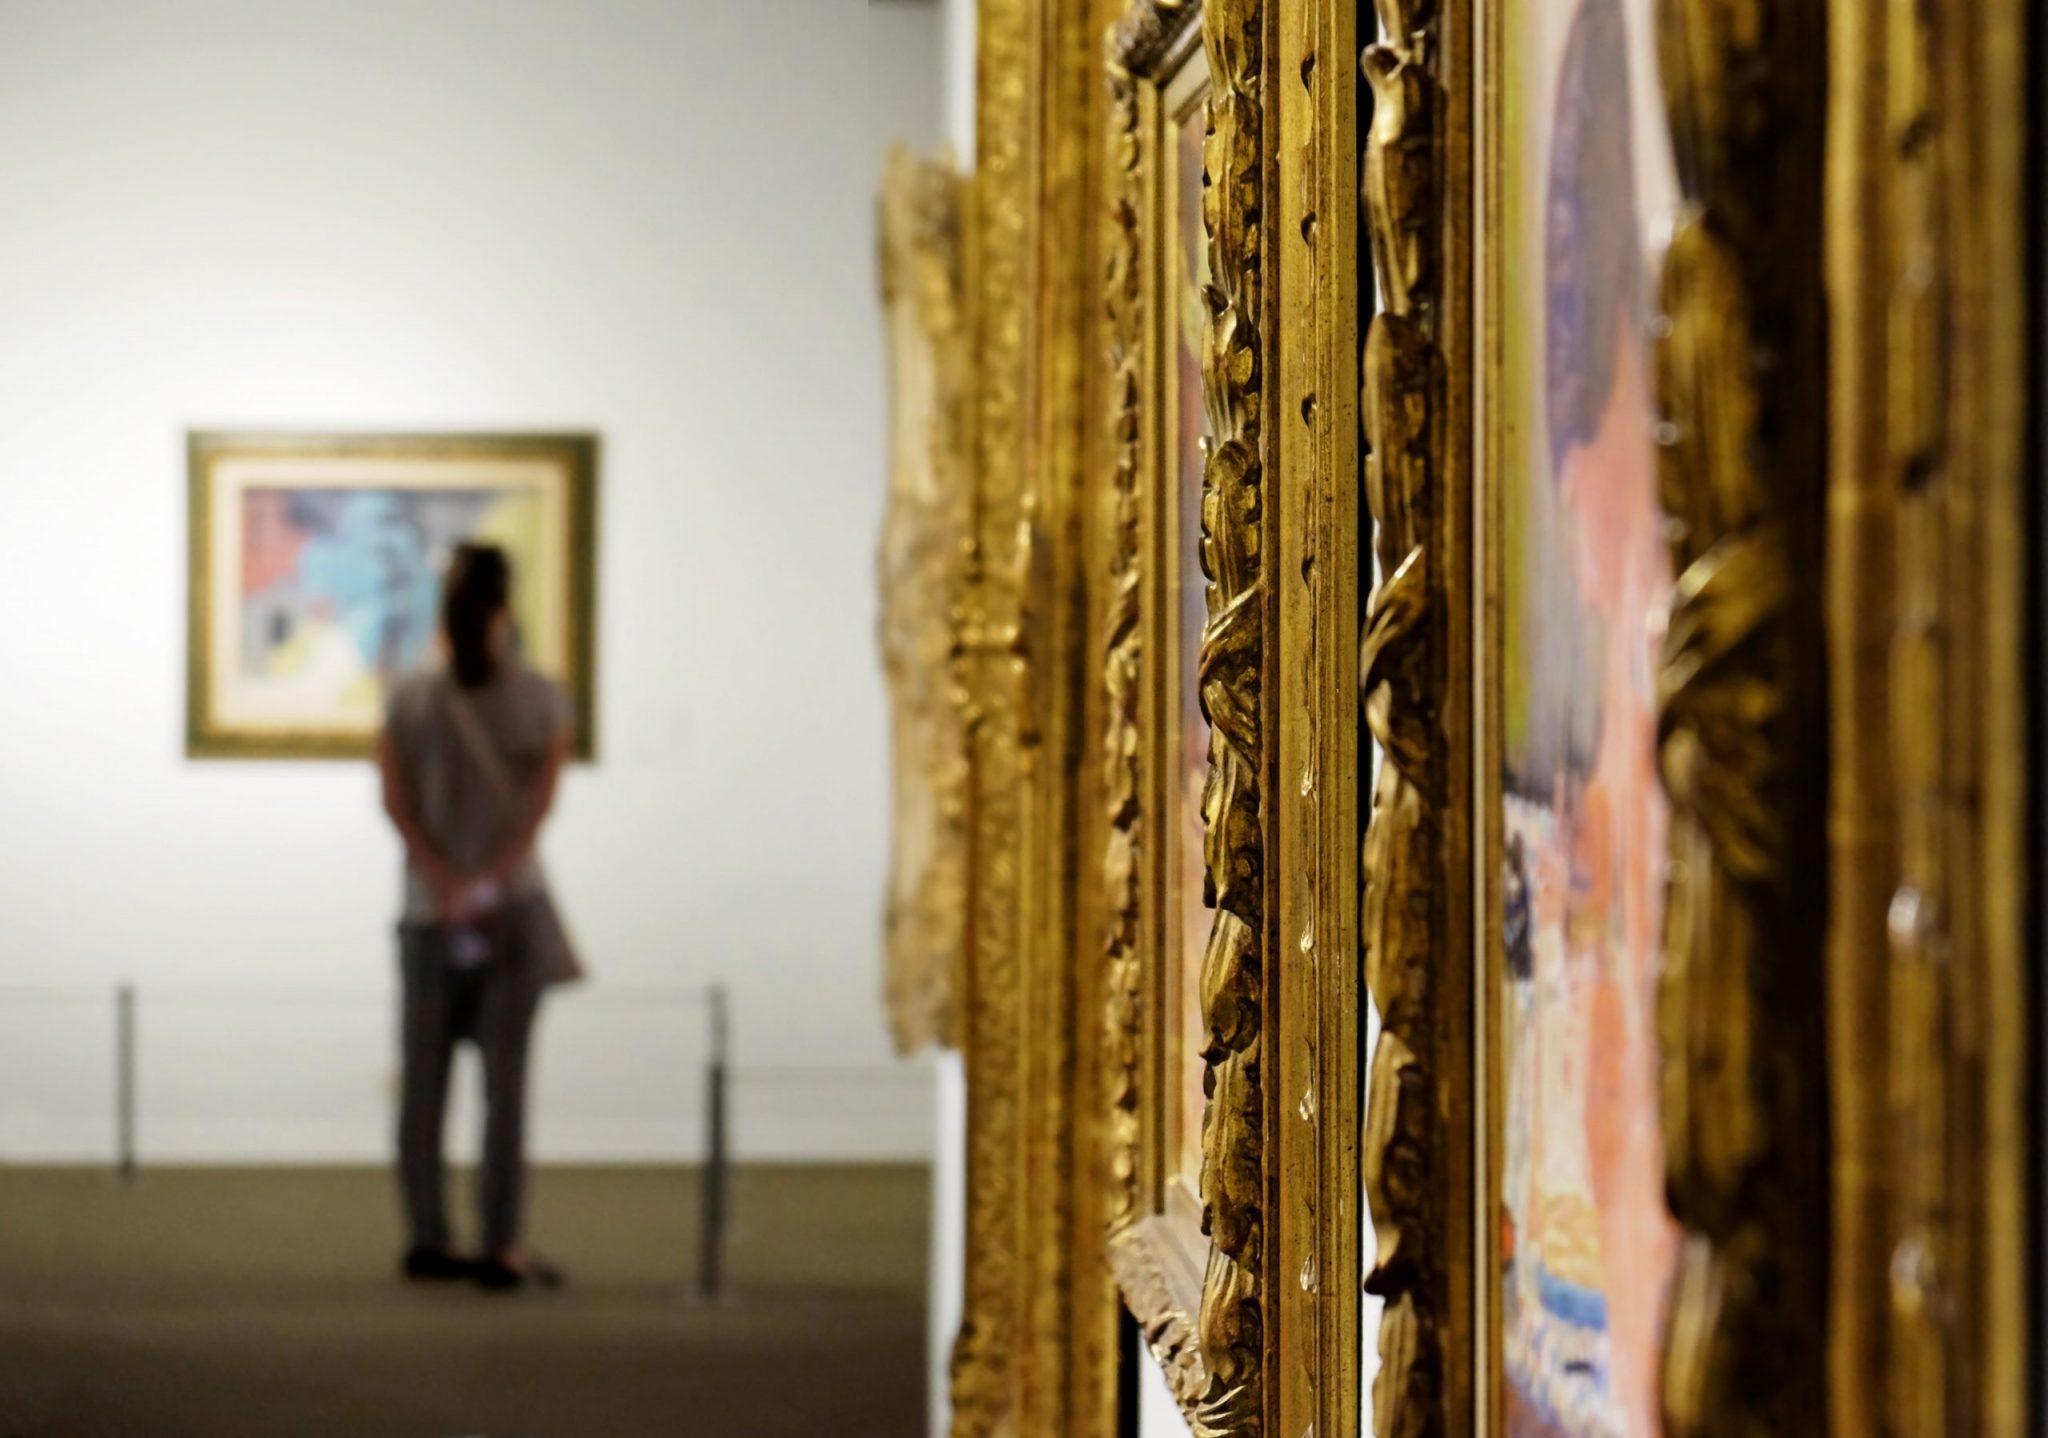 Golden, ornate frames in an art gallery with a person standing in the distance.